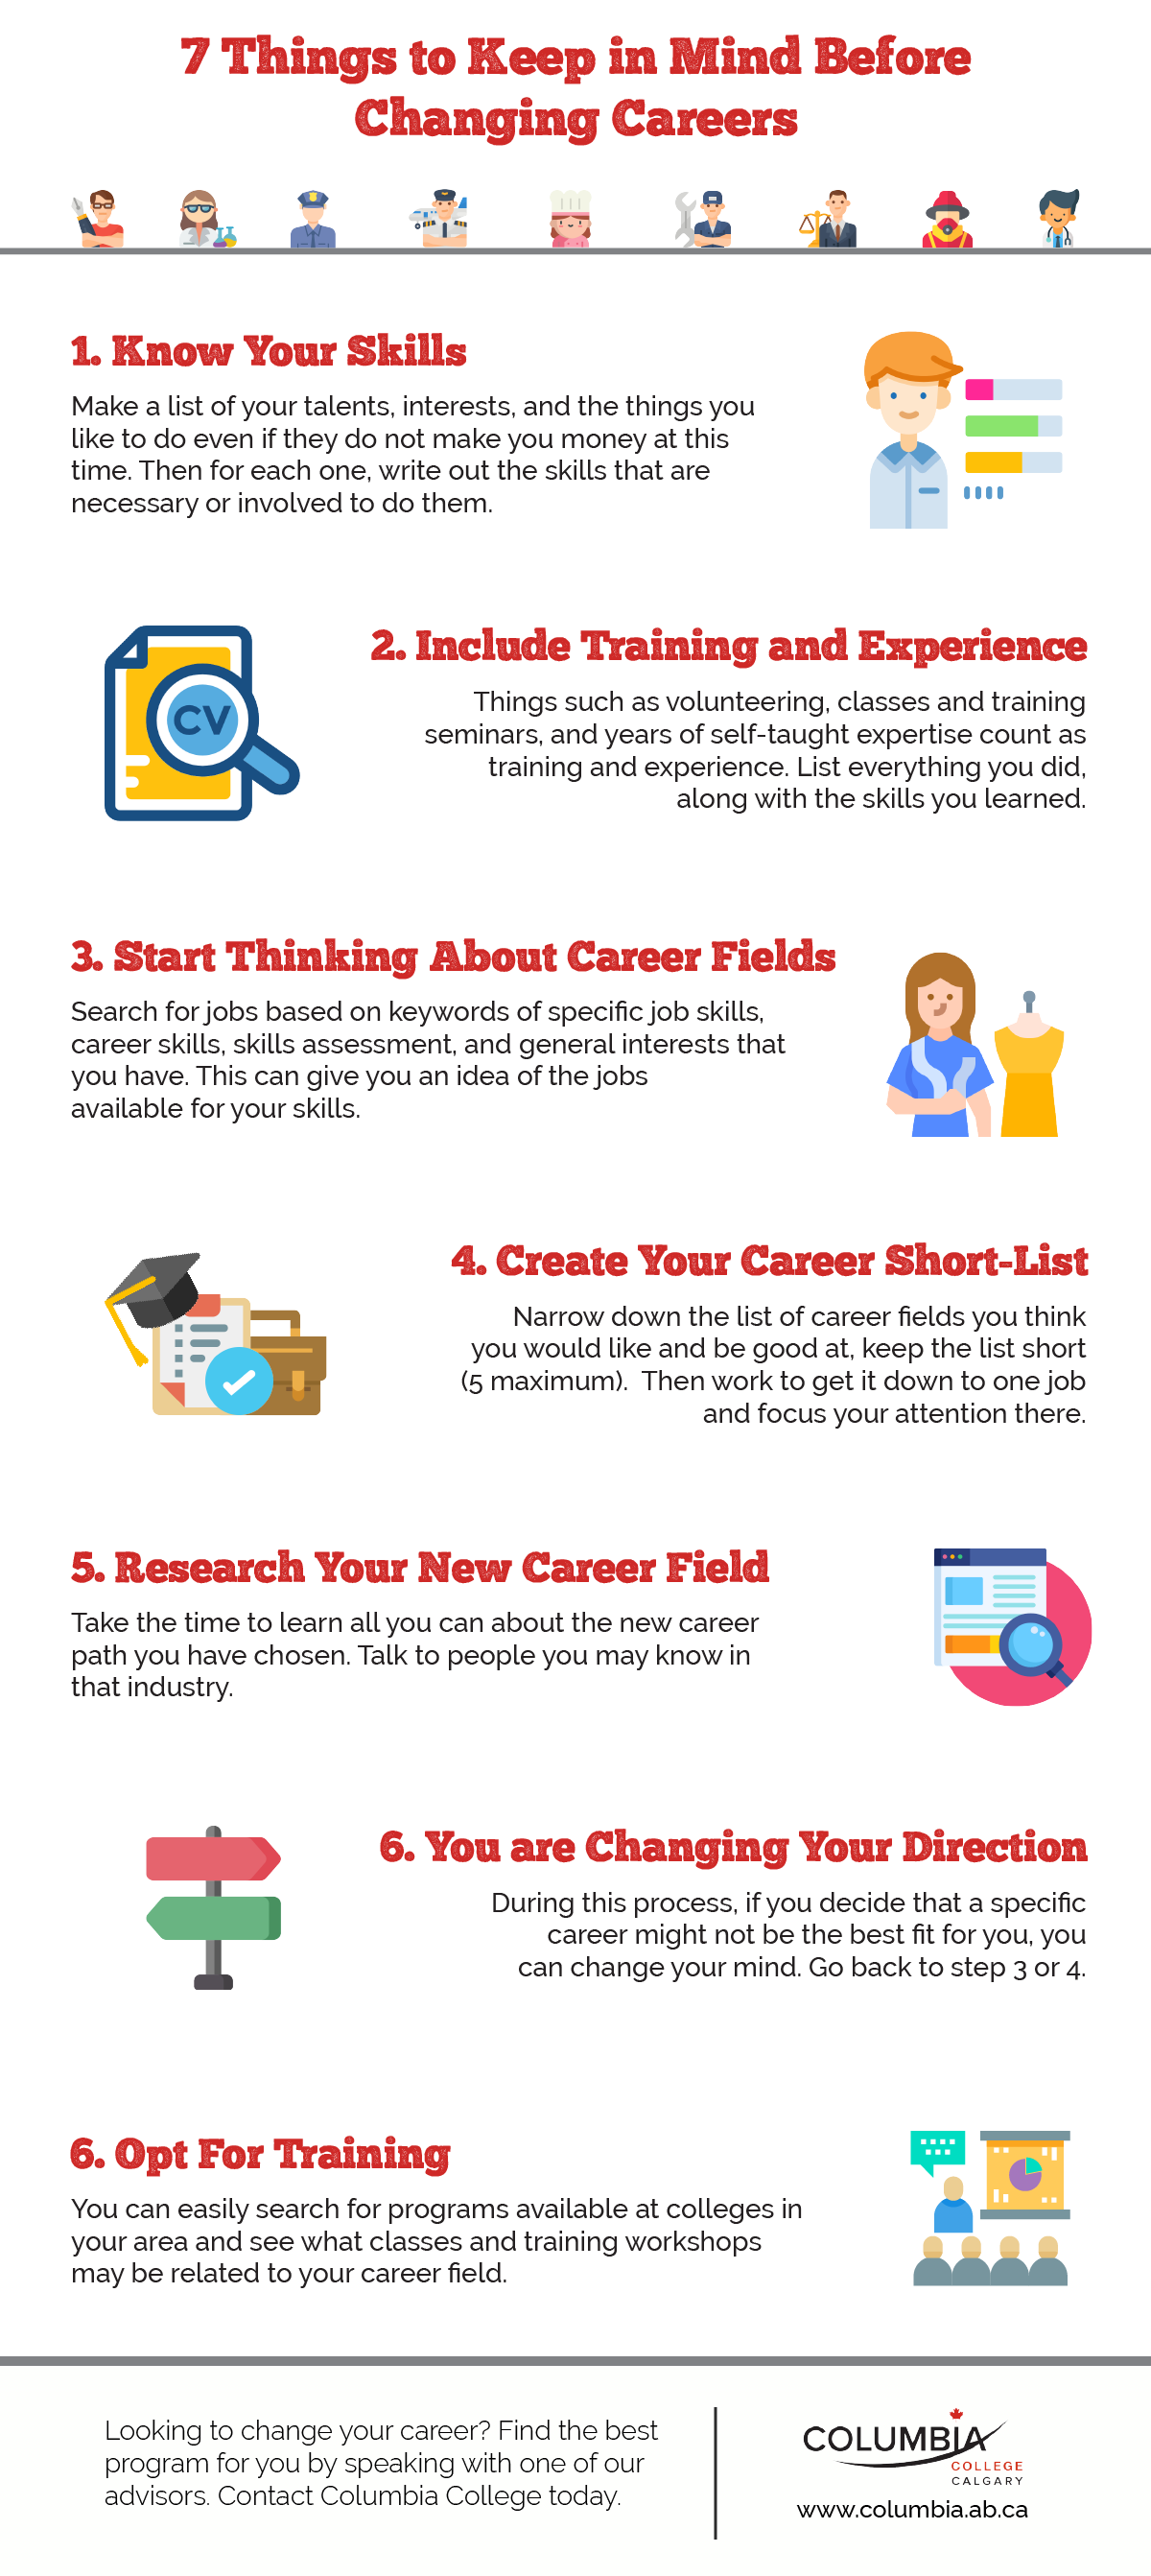 Things to Keep in Mind Before Changing Careers